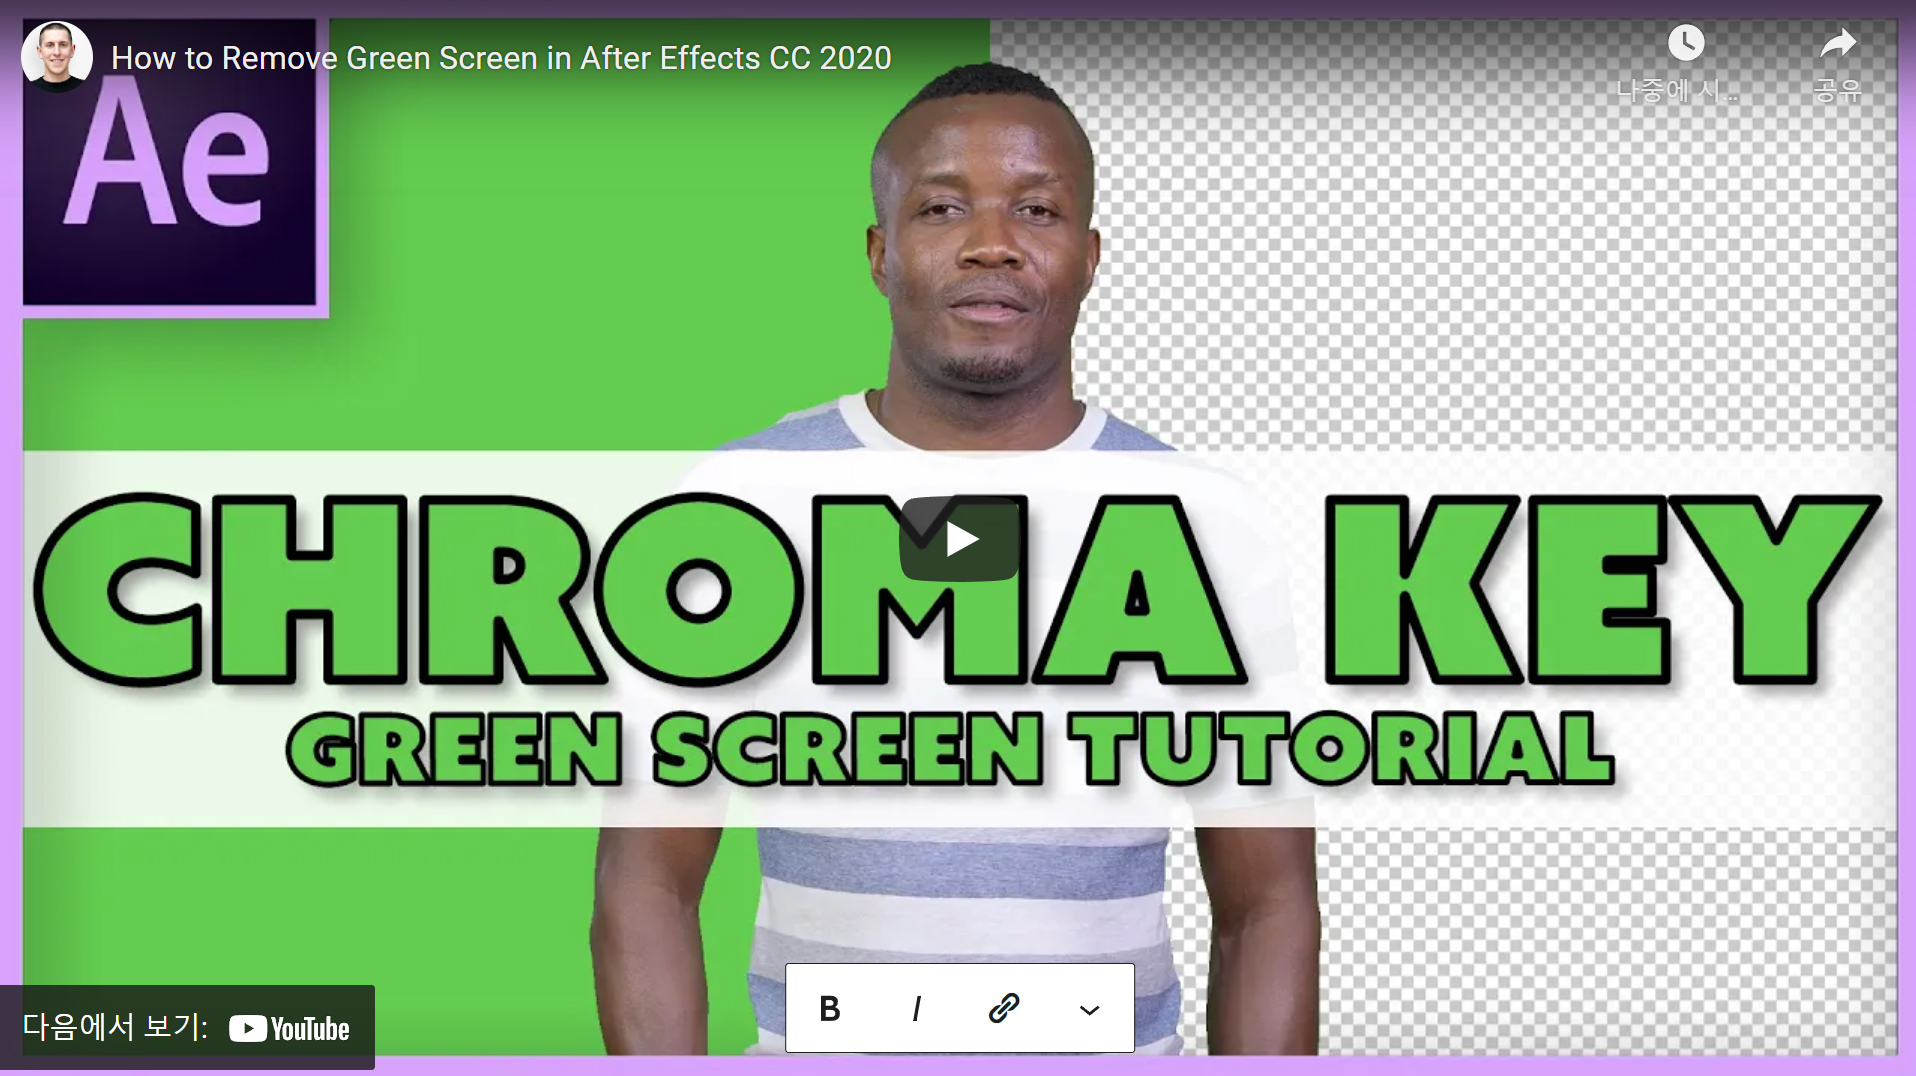 How to Remove Green Screen in After Effects CC 2020